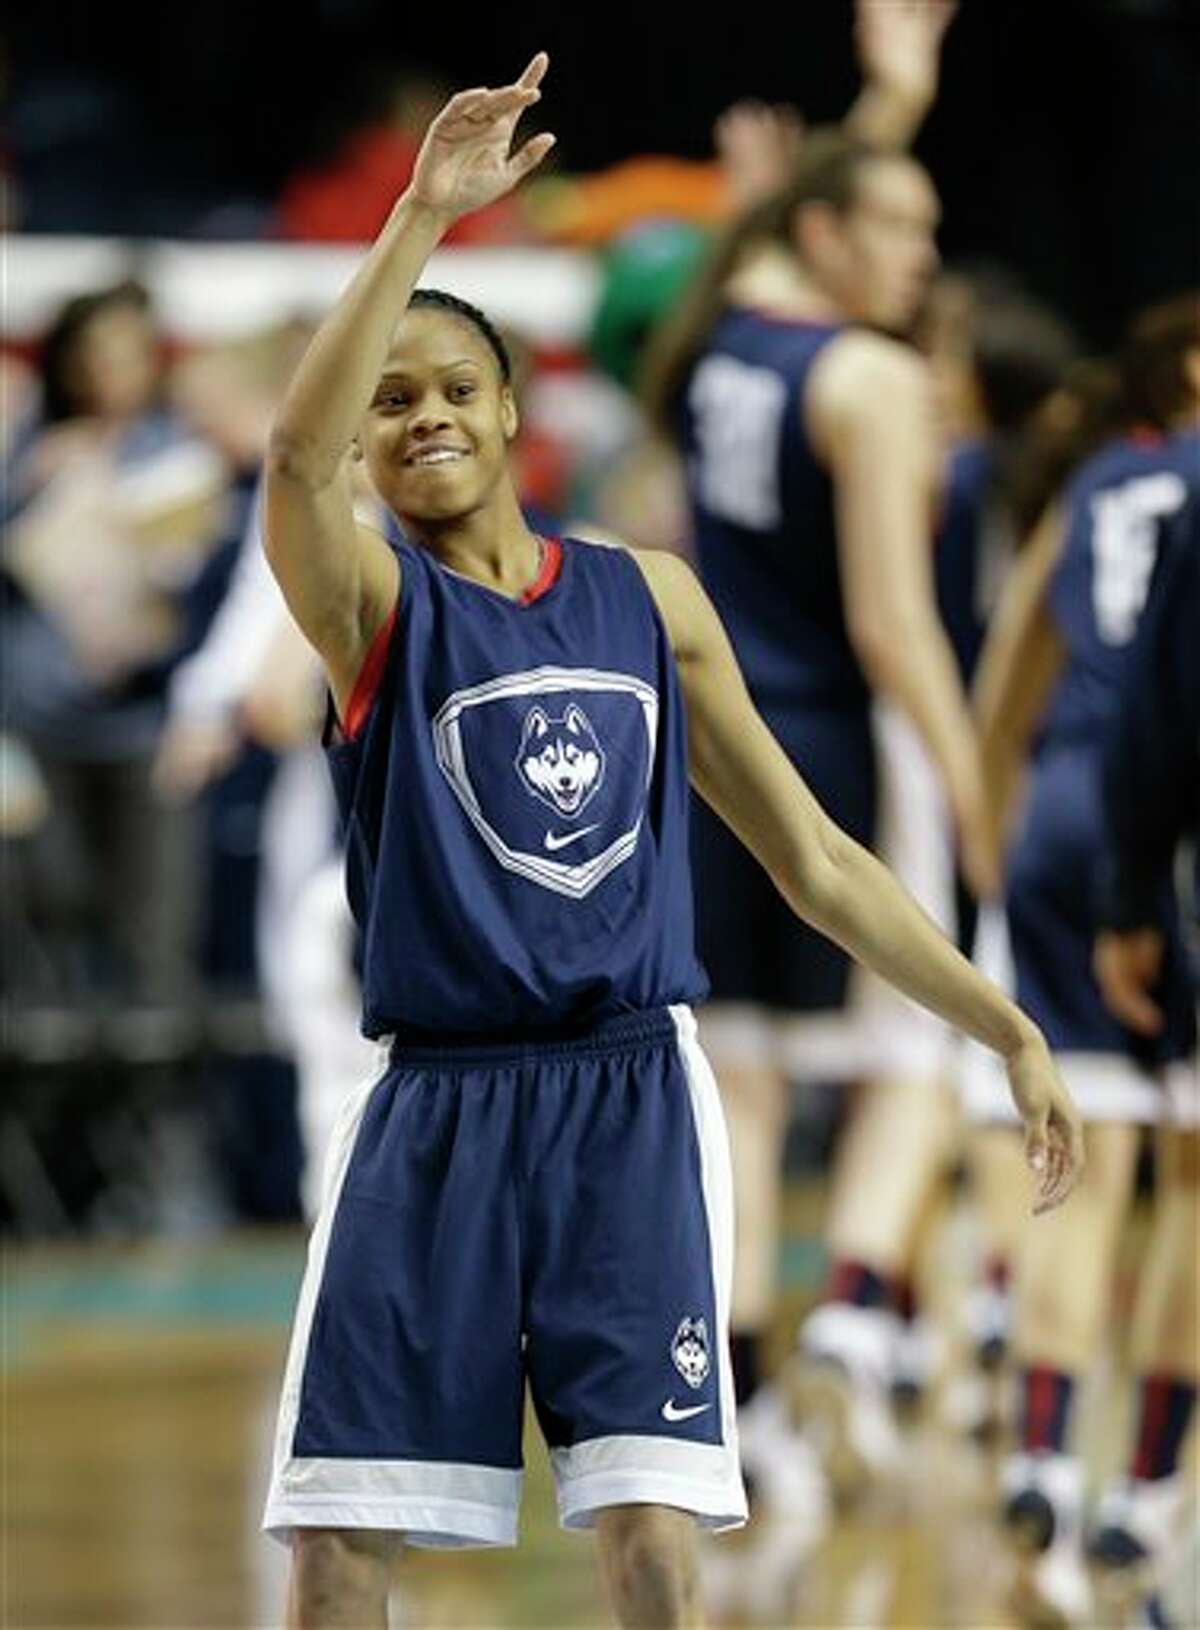 Connecticut guard Moriah Jefferson waves after practice before the women's Final Four of the NCAA college basketball tournament, Saturday, April 5, 2014, in Nashville, Tenn. Connecticut plays Stanford Sunday. (AP Photo/Mark Humphrey)